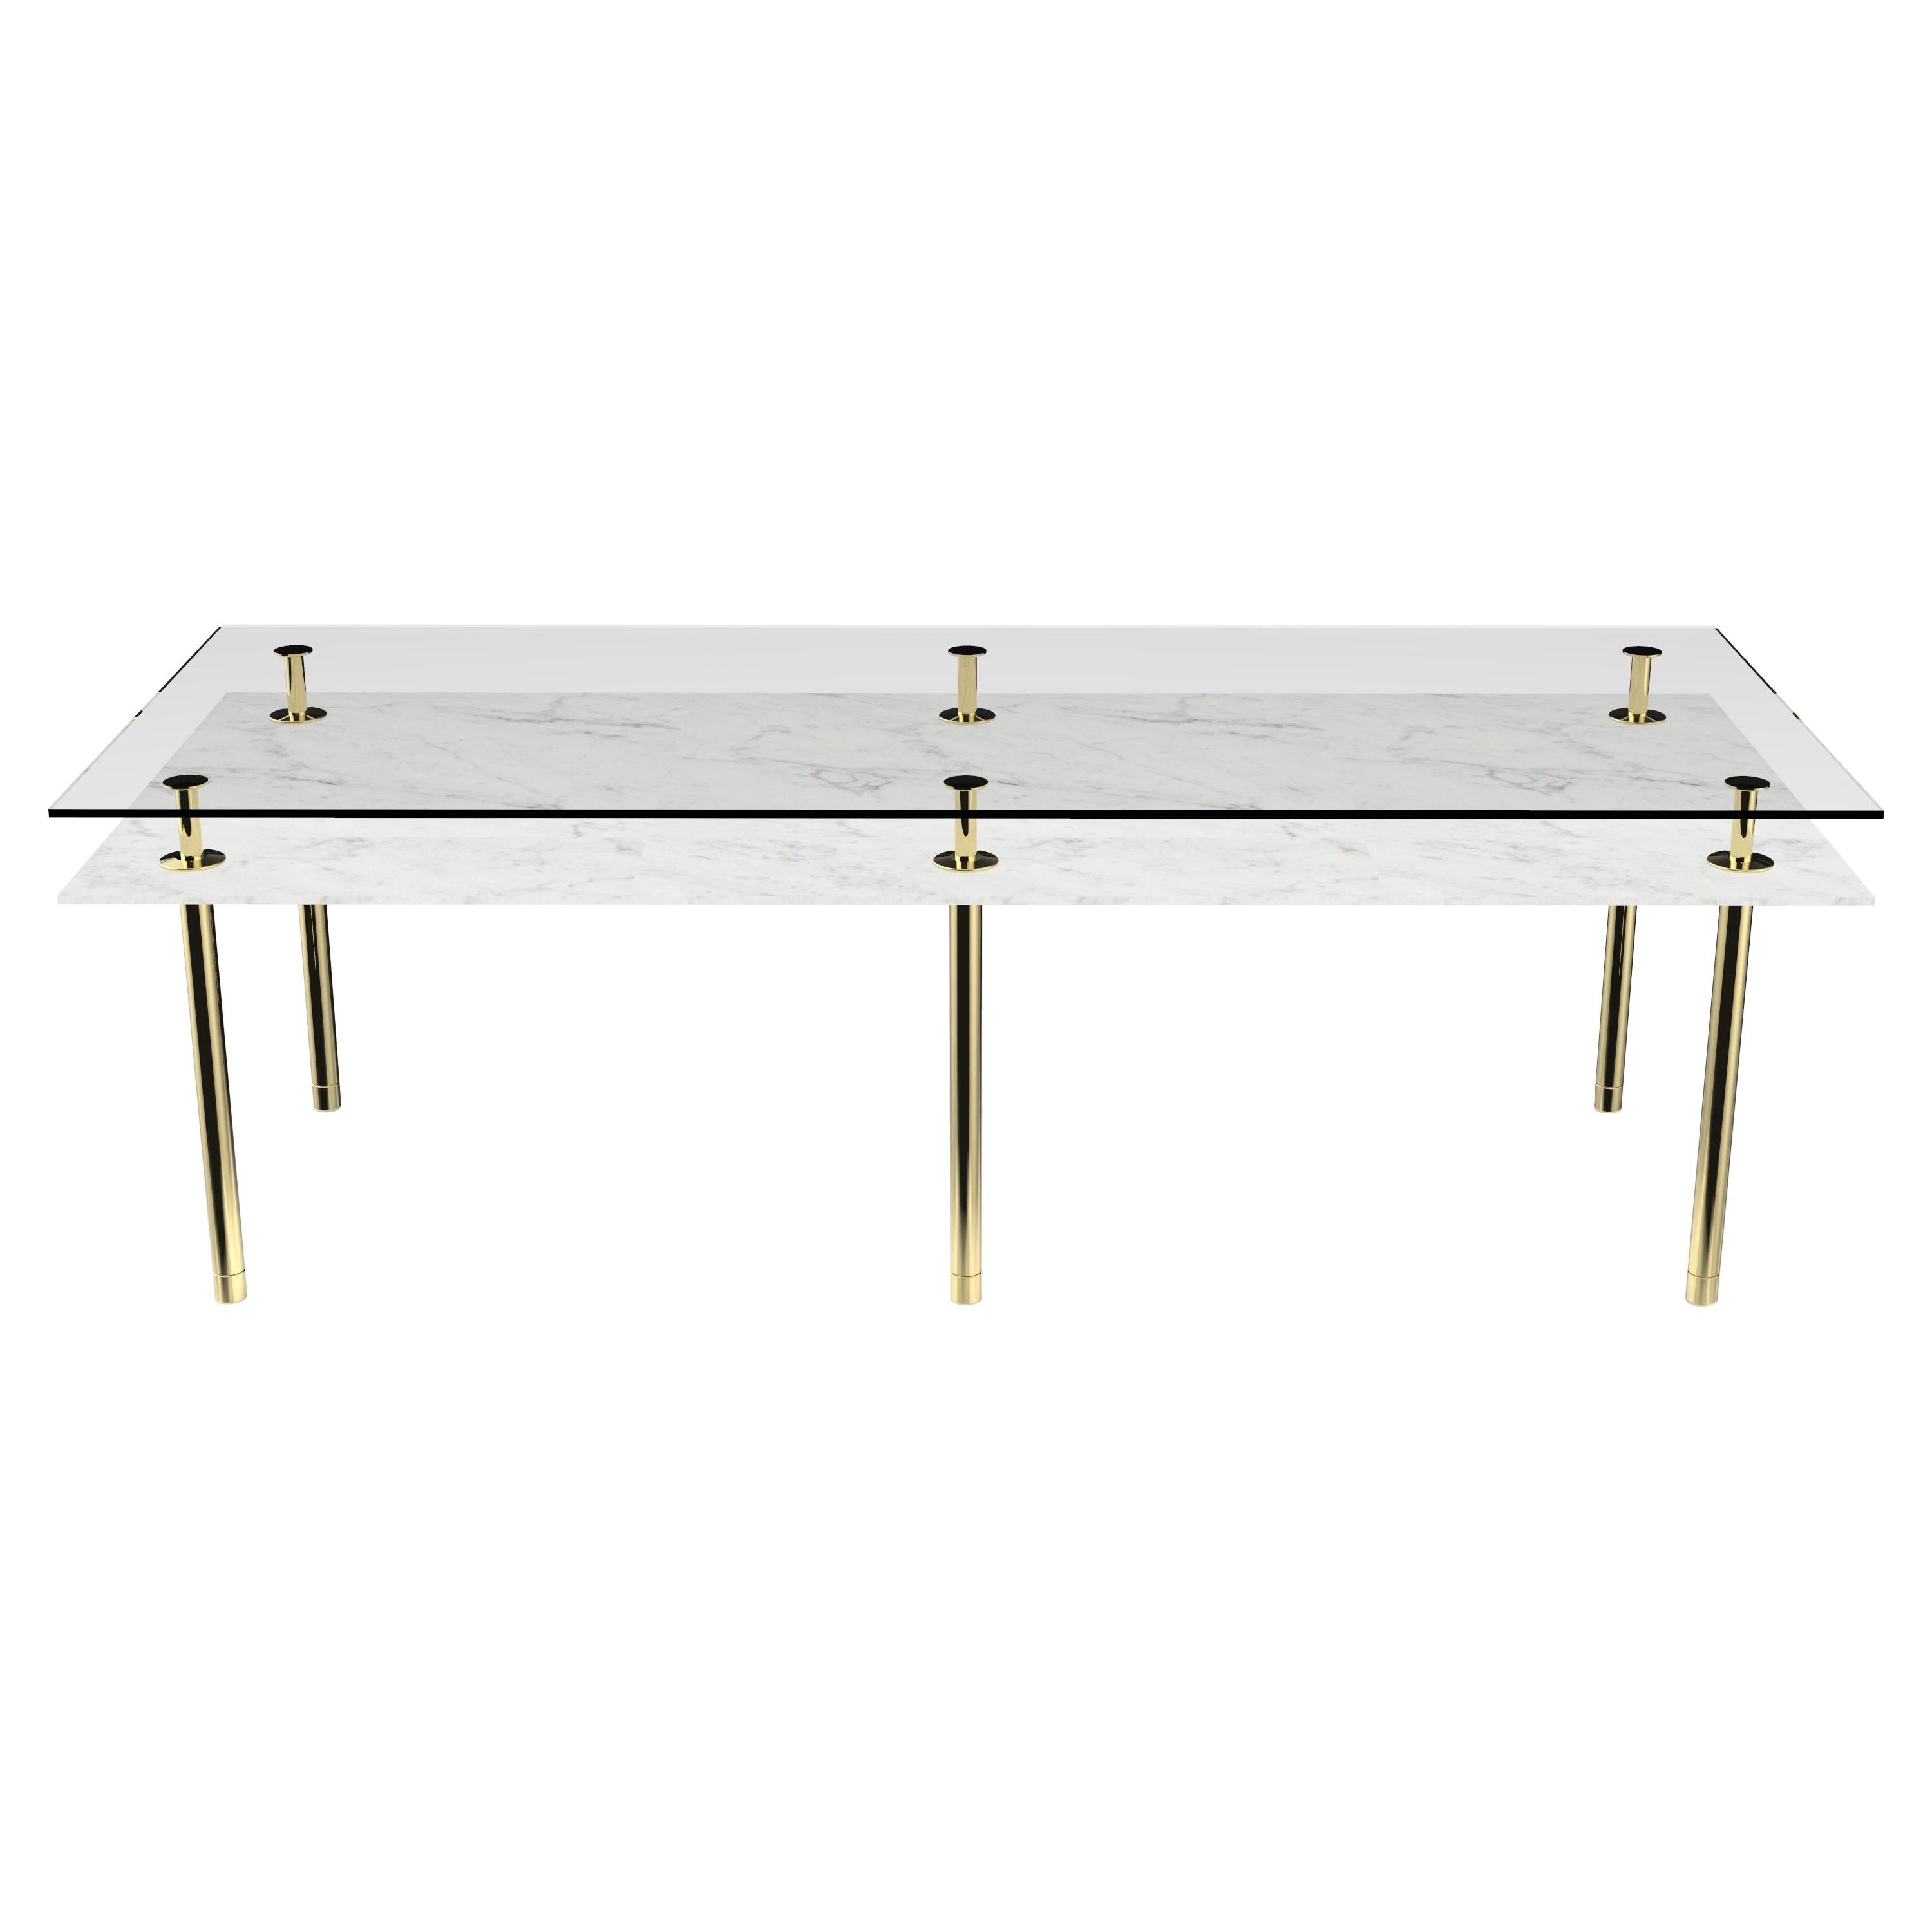 Legs Medium Dining Table with Carrara White Marble Top and Polished Brass